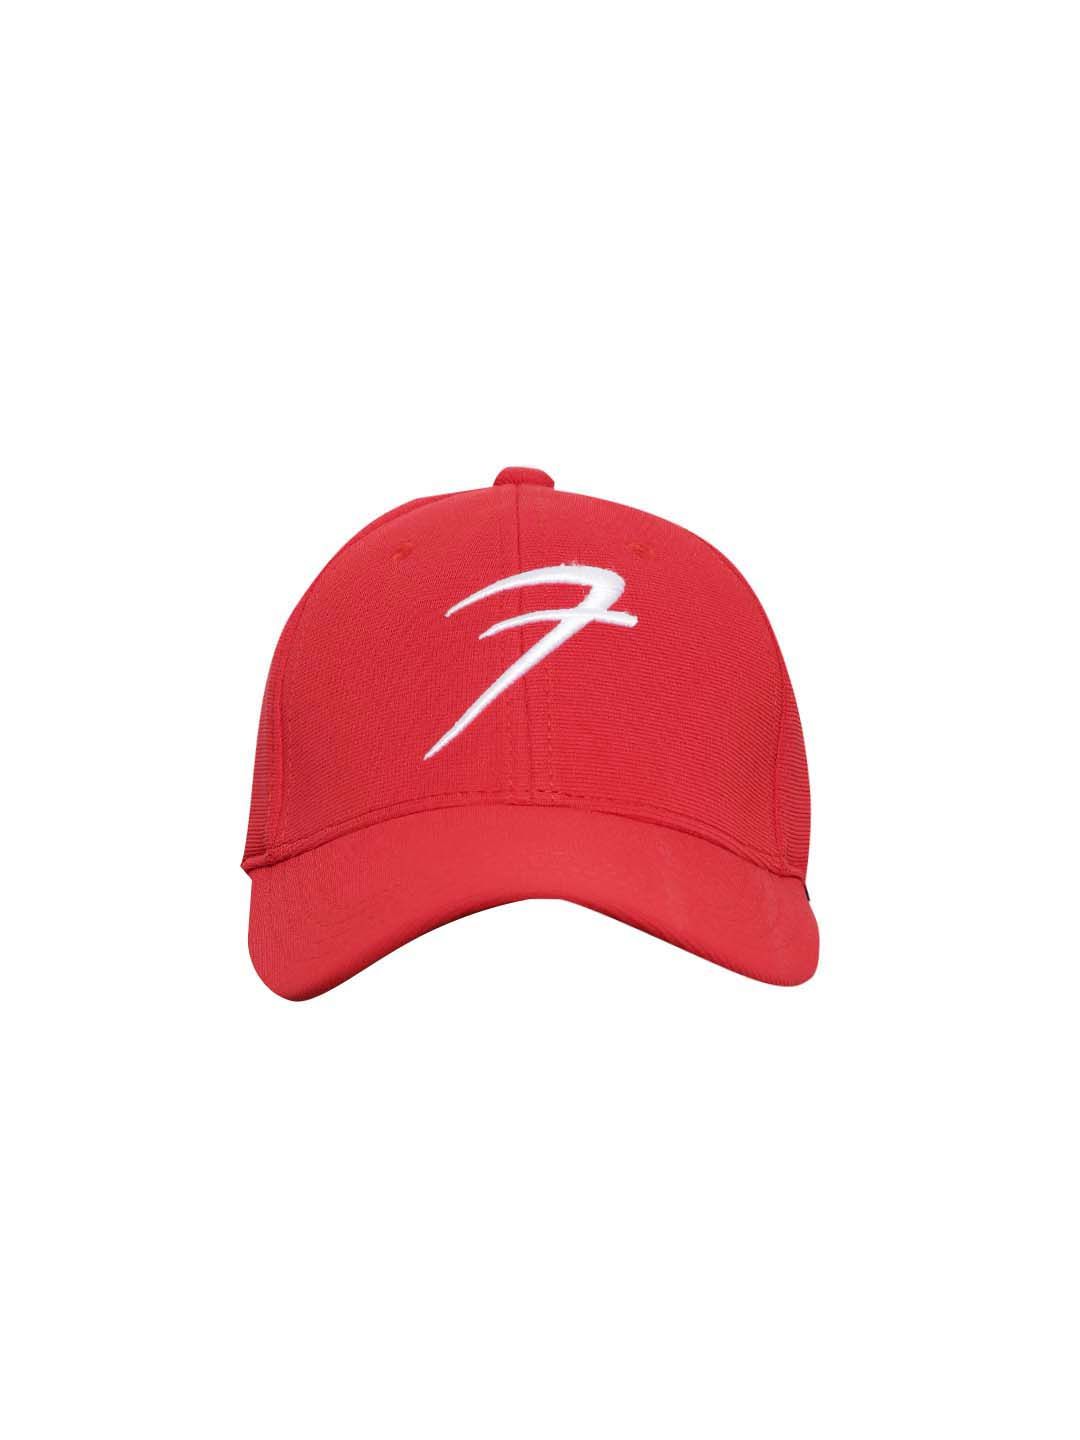 FUAARK Unisex Red & White Embroidered Baseball Cap Price in India